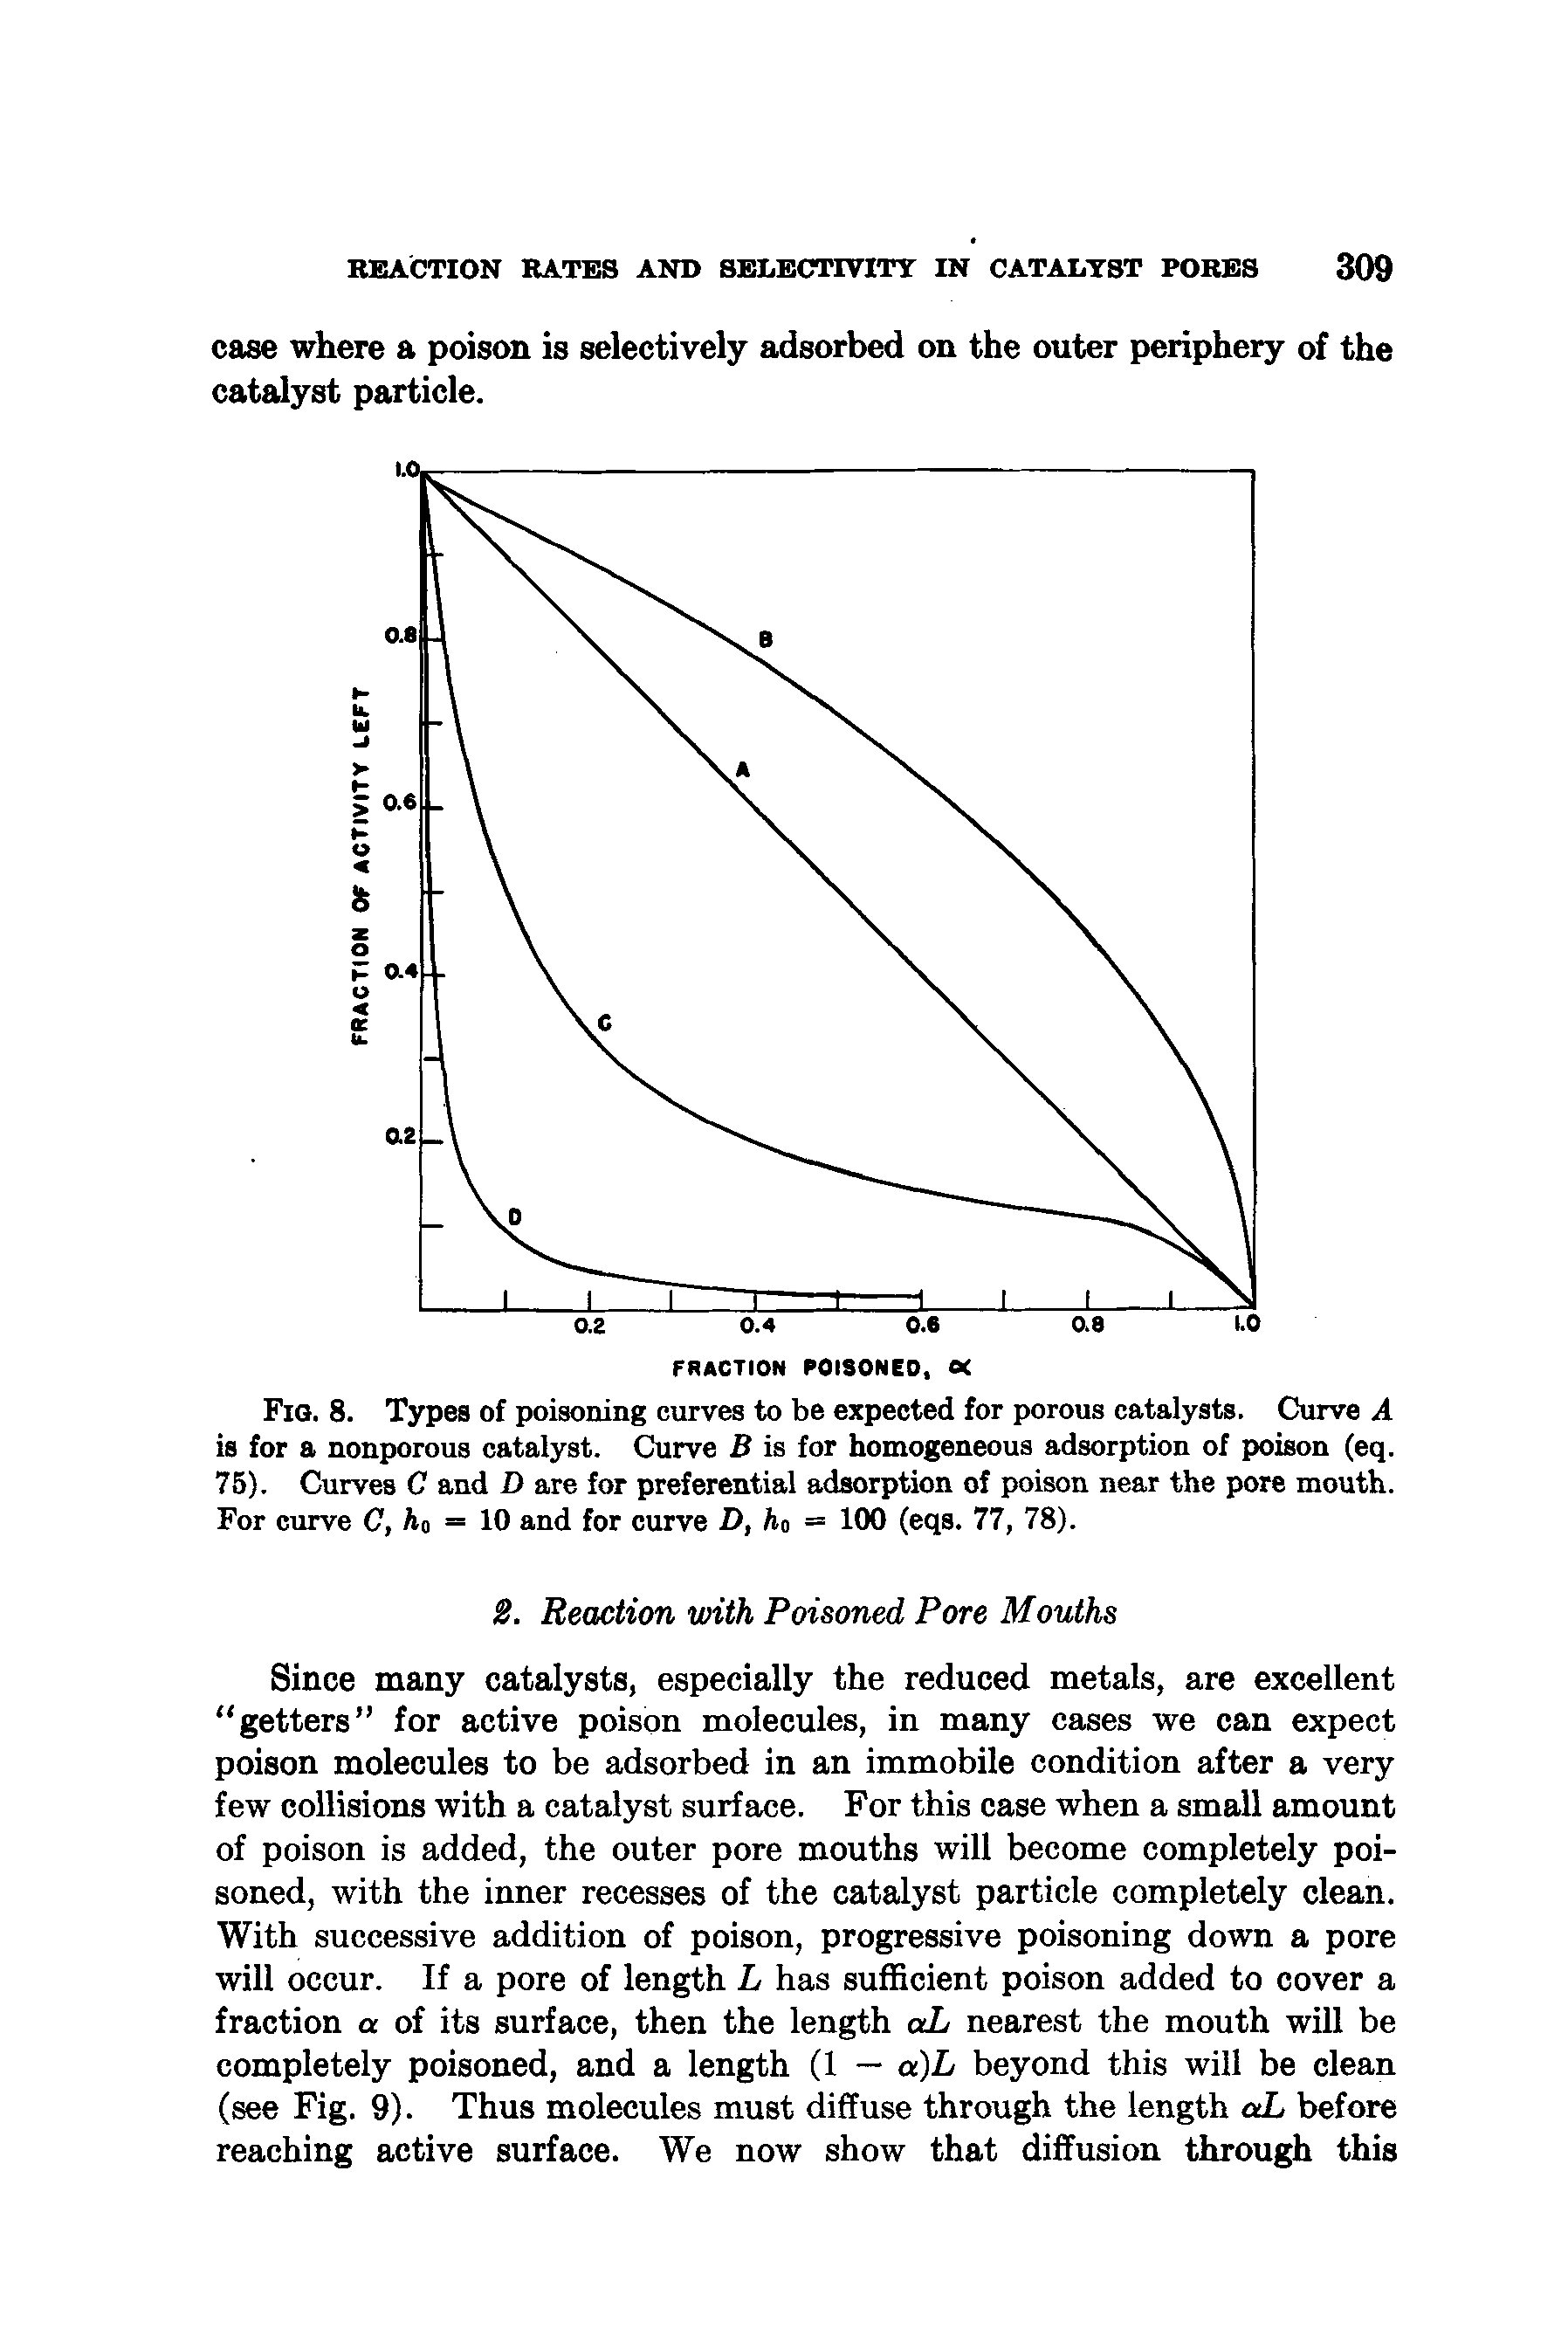 Fig. 8. Types of poisoning curves to be expected for porous catalysts. Curve A is for a nonporous catalyst. Curve B is for homogeneous adsorption of poison (eq. 75). Curves C and D are for preferential adsorption of poison near the pore mouth. For curve C, ho 10 and for curve D, ho = 100 (eqs. 77, 78).